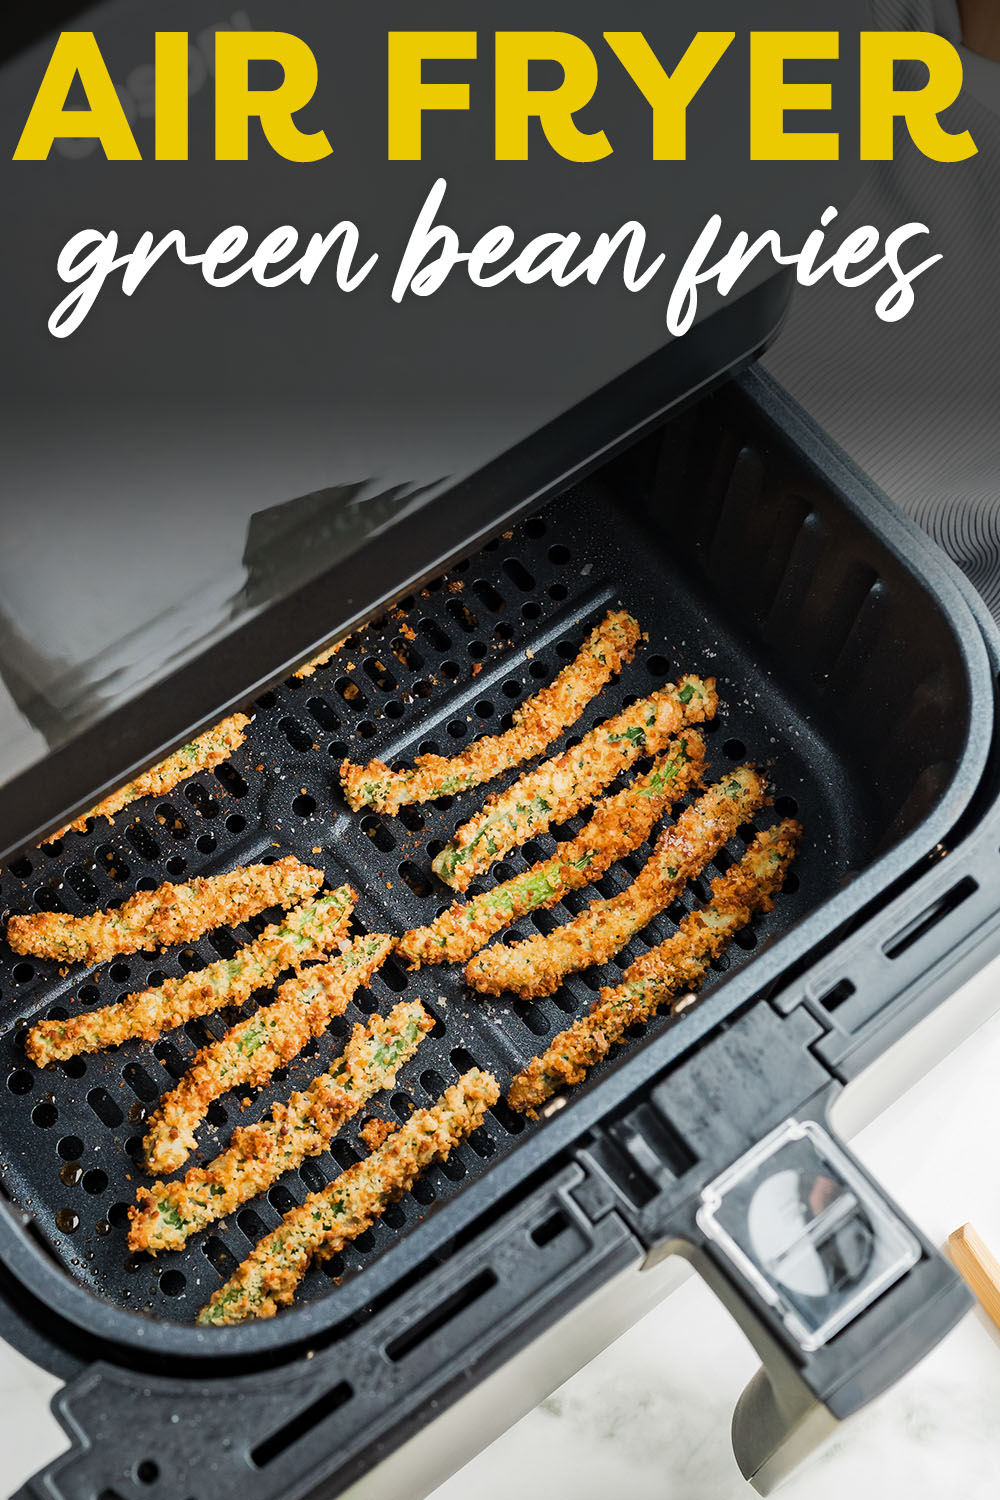 Crispy green bean fries are healthier now that we can make them in the air fryer!